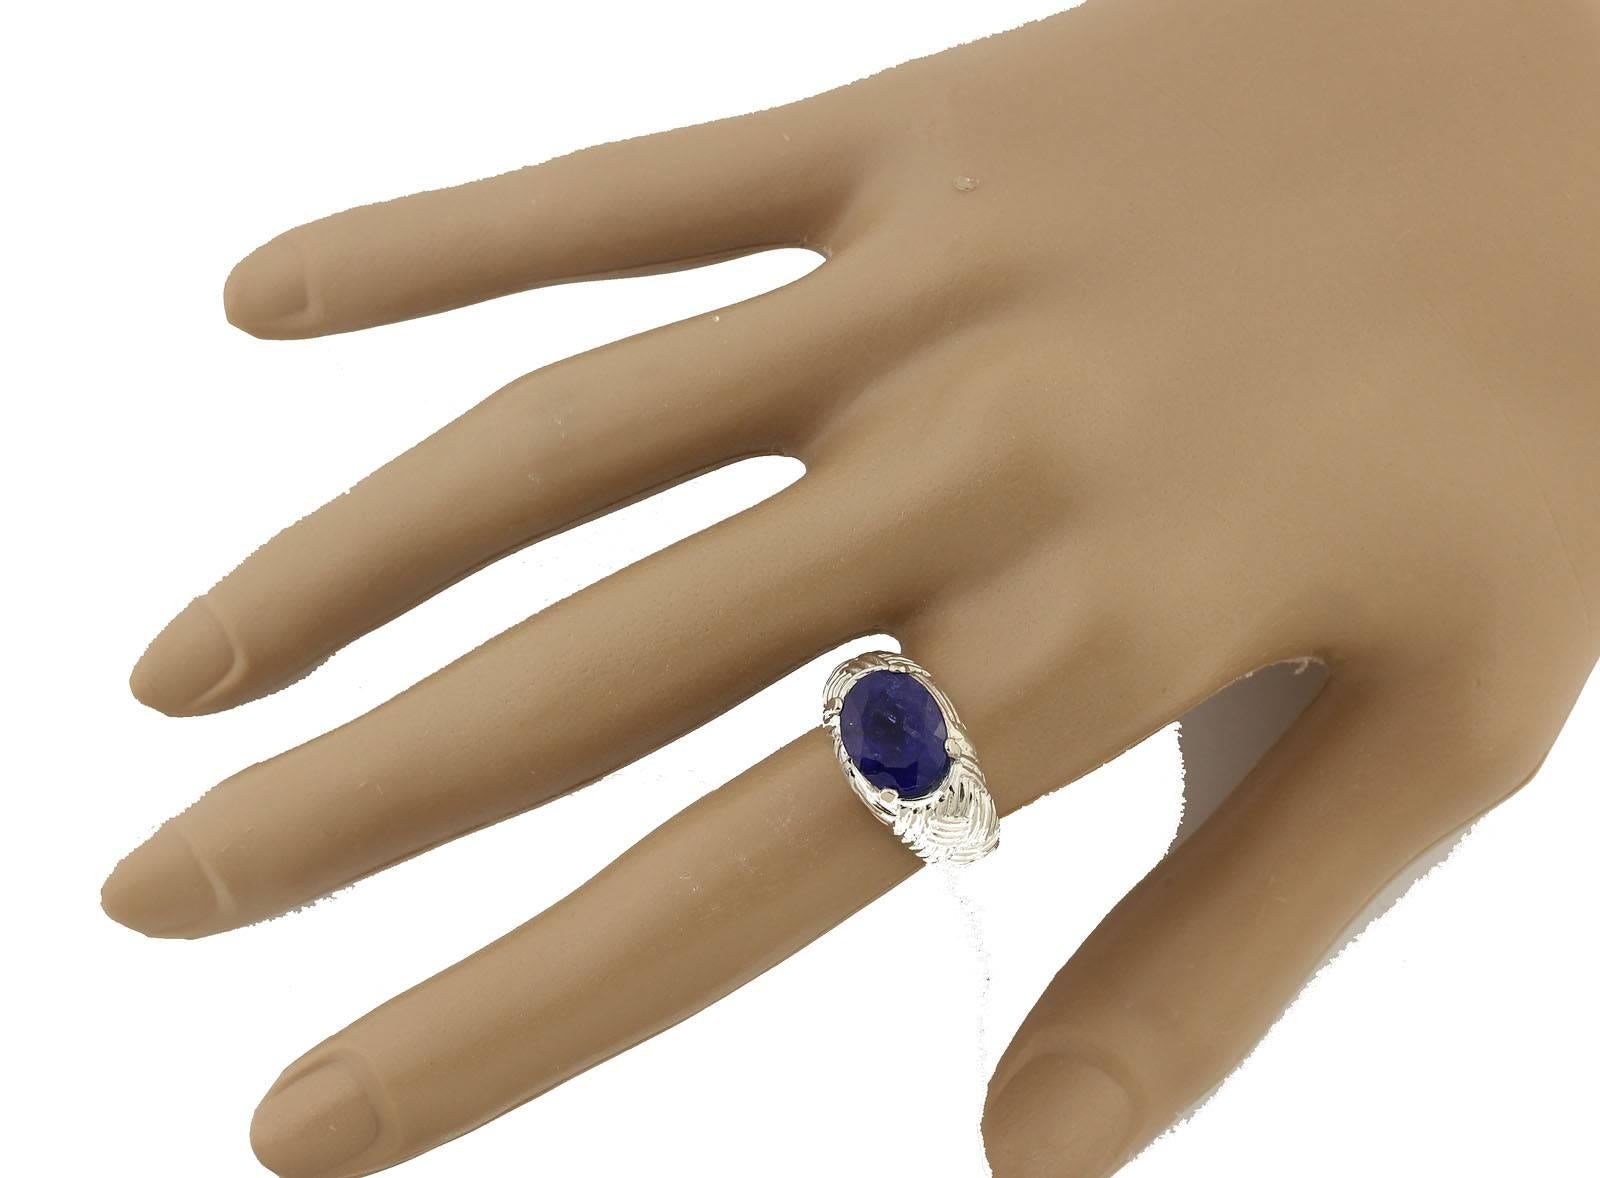 Oval Cut AJD Bright Sparkly 5.68 Ct Sparkling Purply-Blue Tanzanite Cocktail Ring For Sale